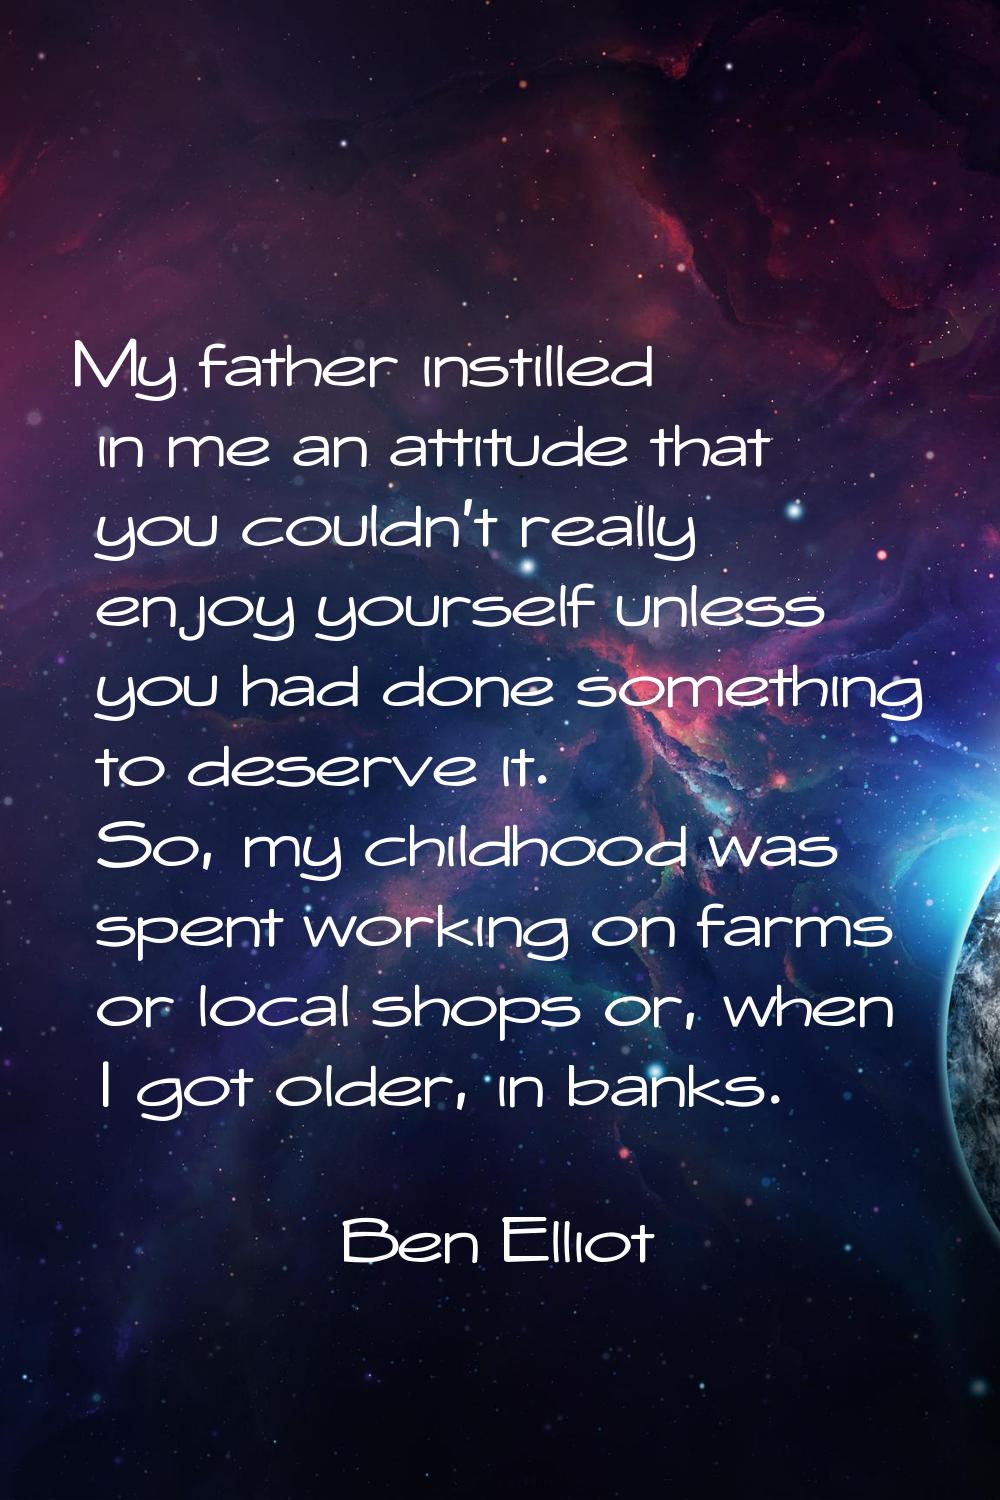 My father instilled in me an attitude that you couldn't really enjoy yourself unless you had done s